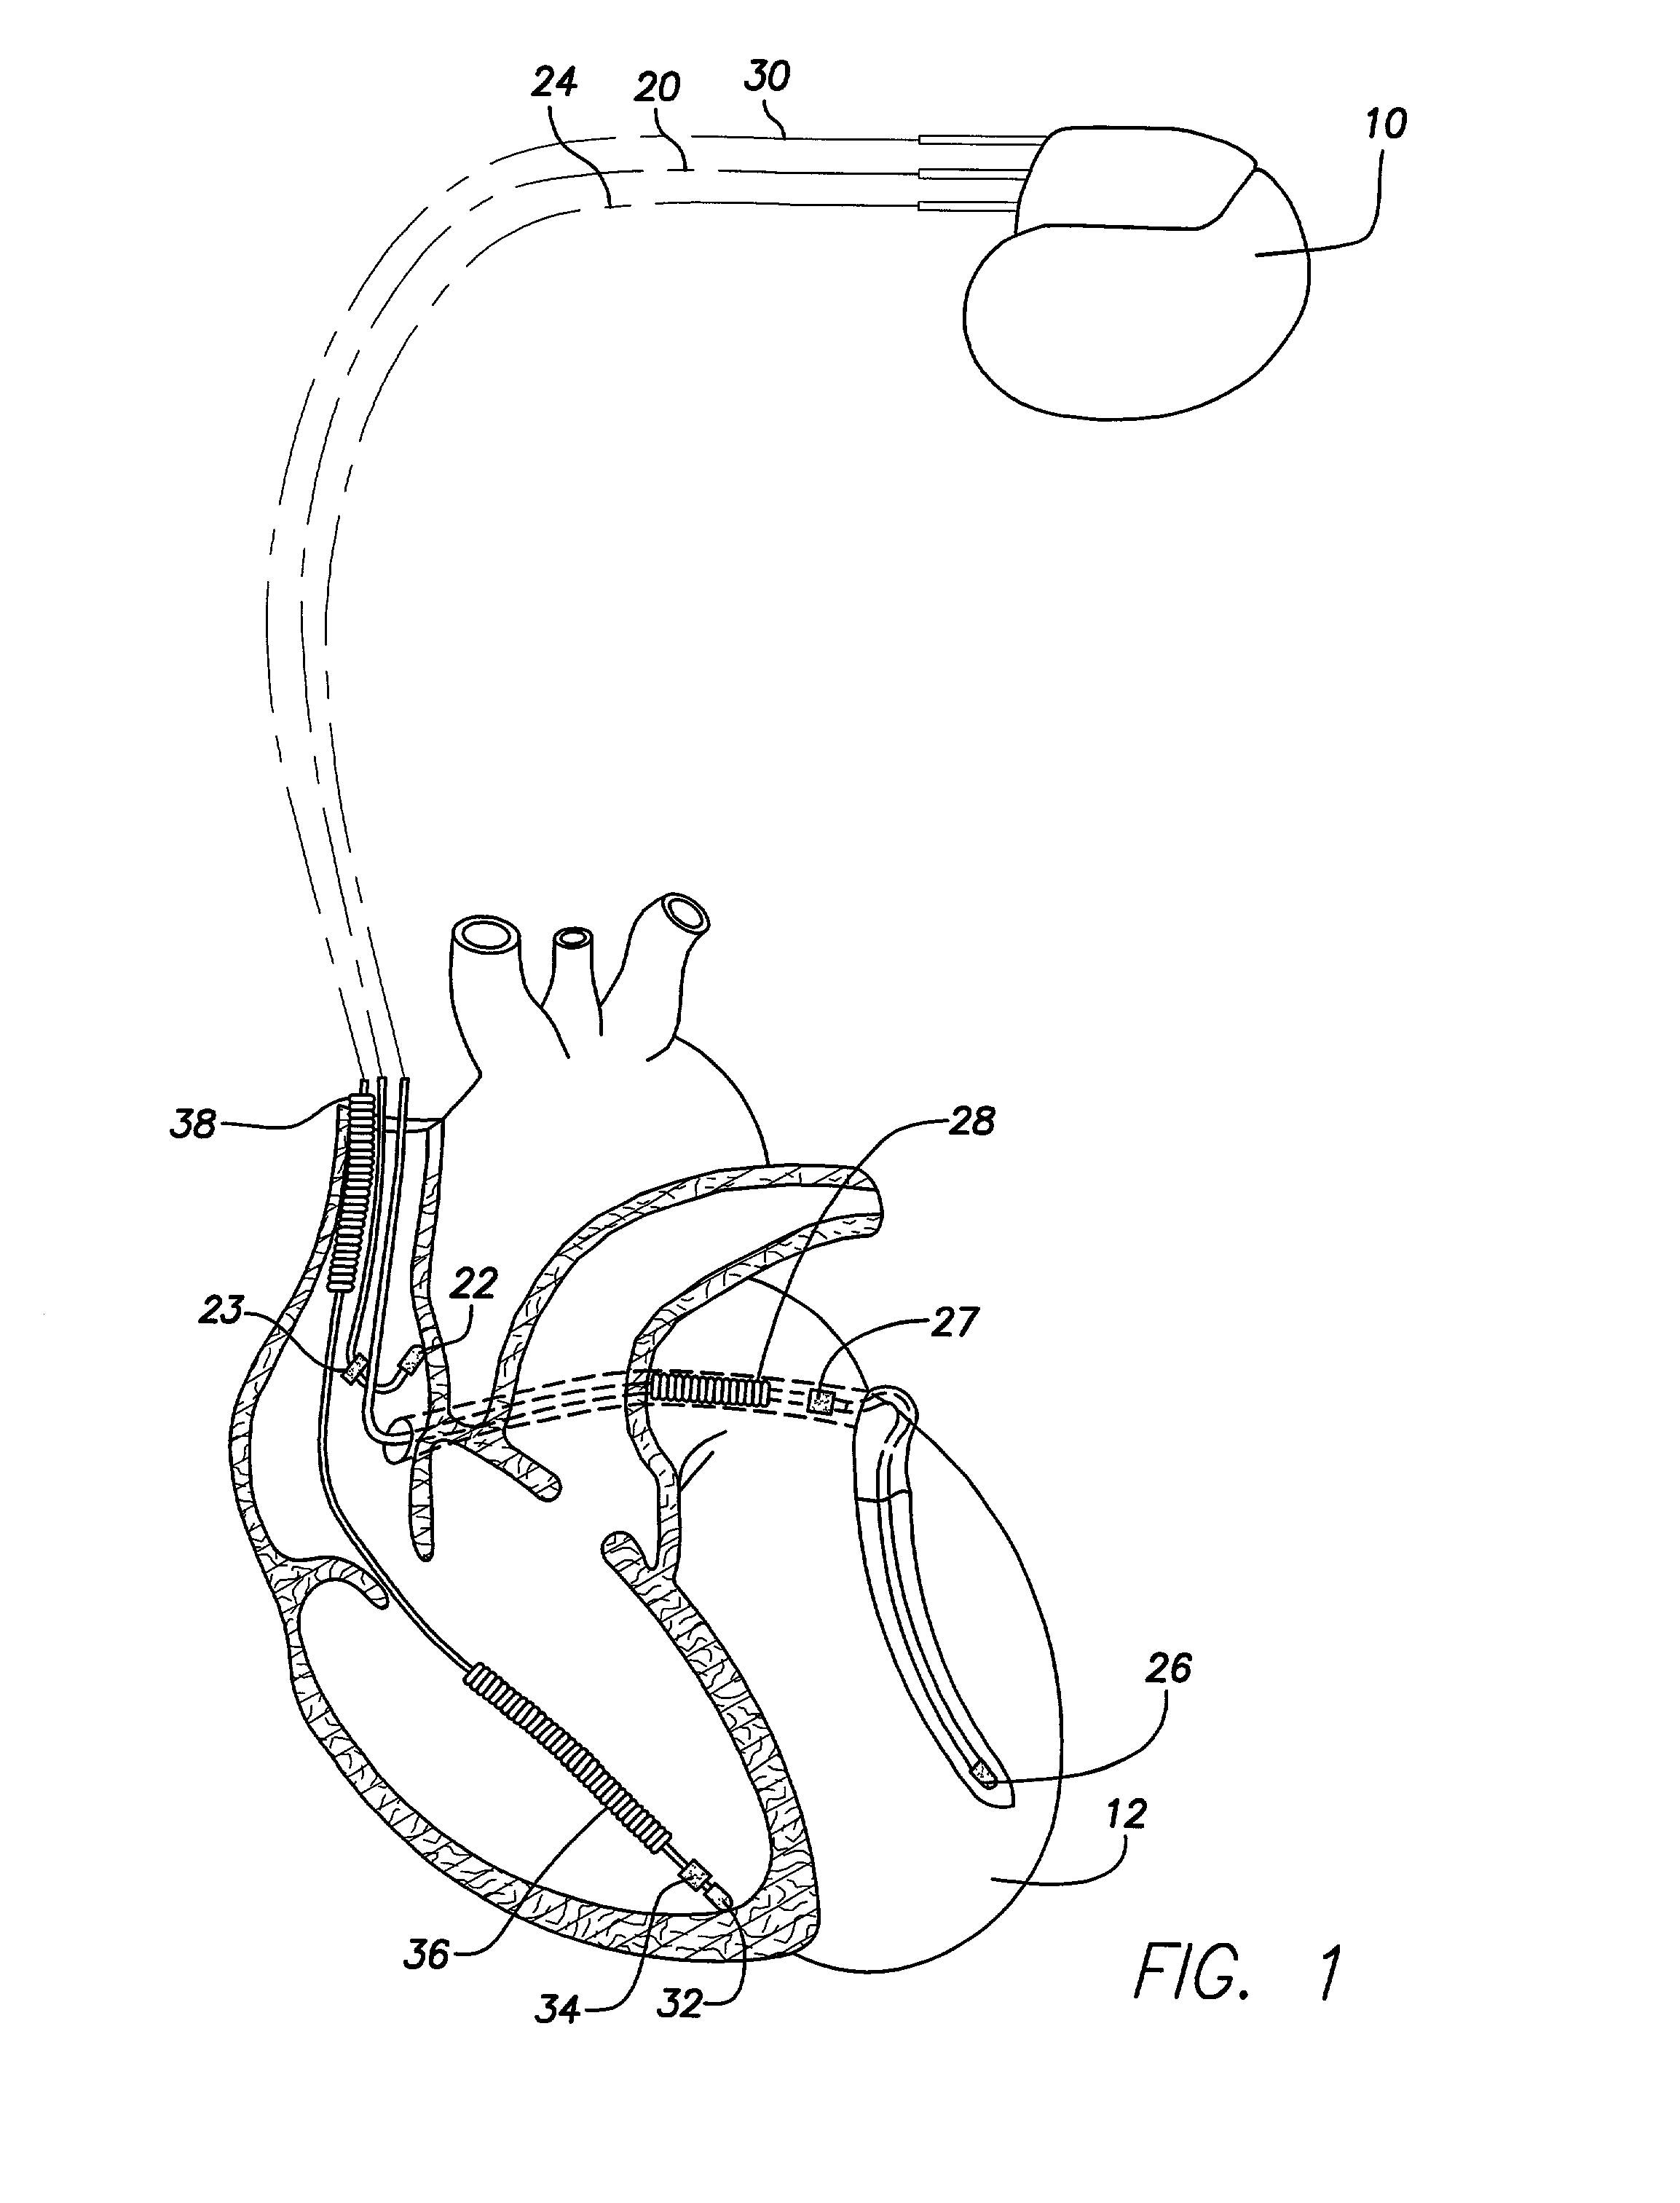 Method and device for enhanced capture tracking by discrimination of fusion beats